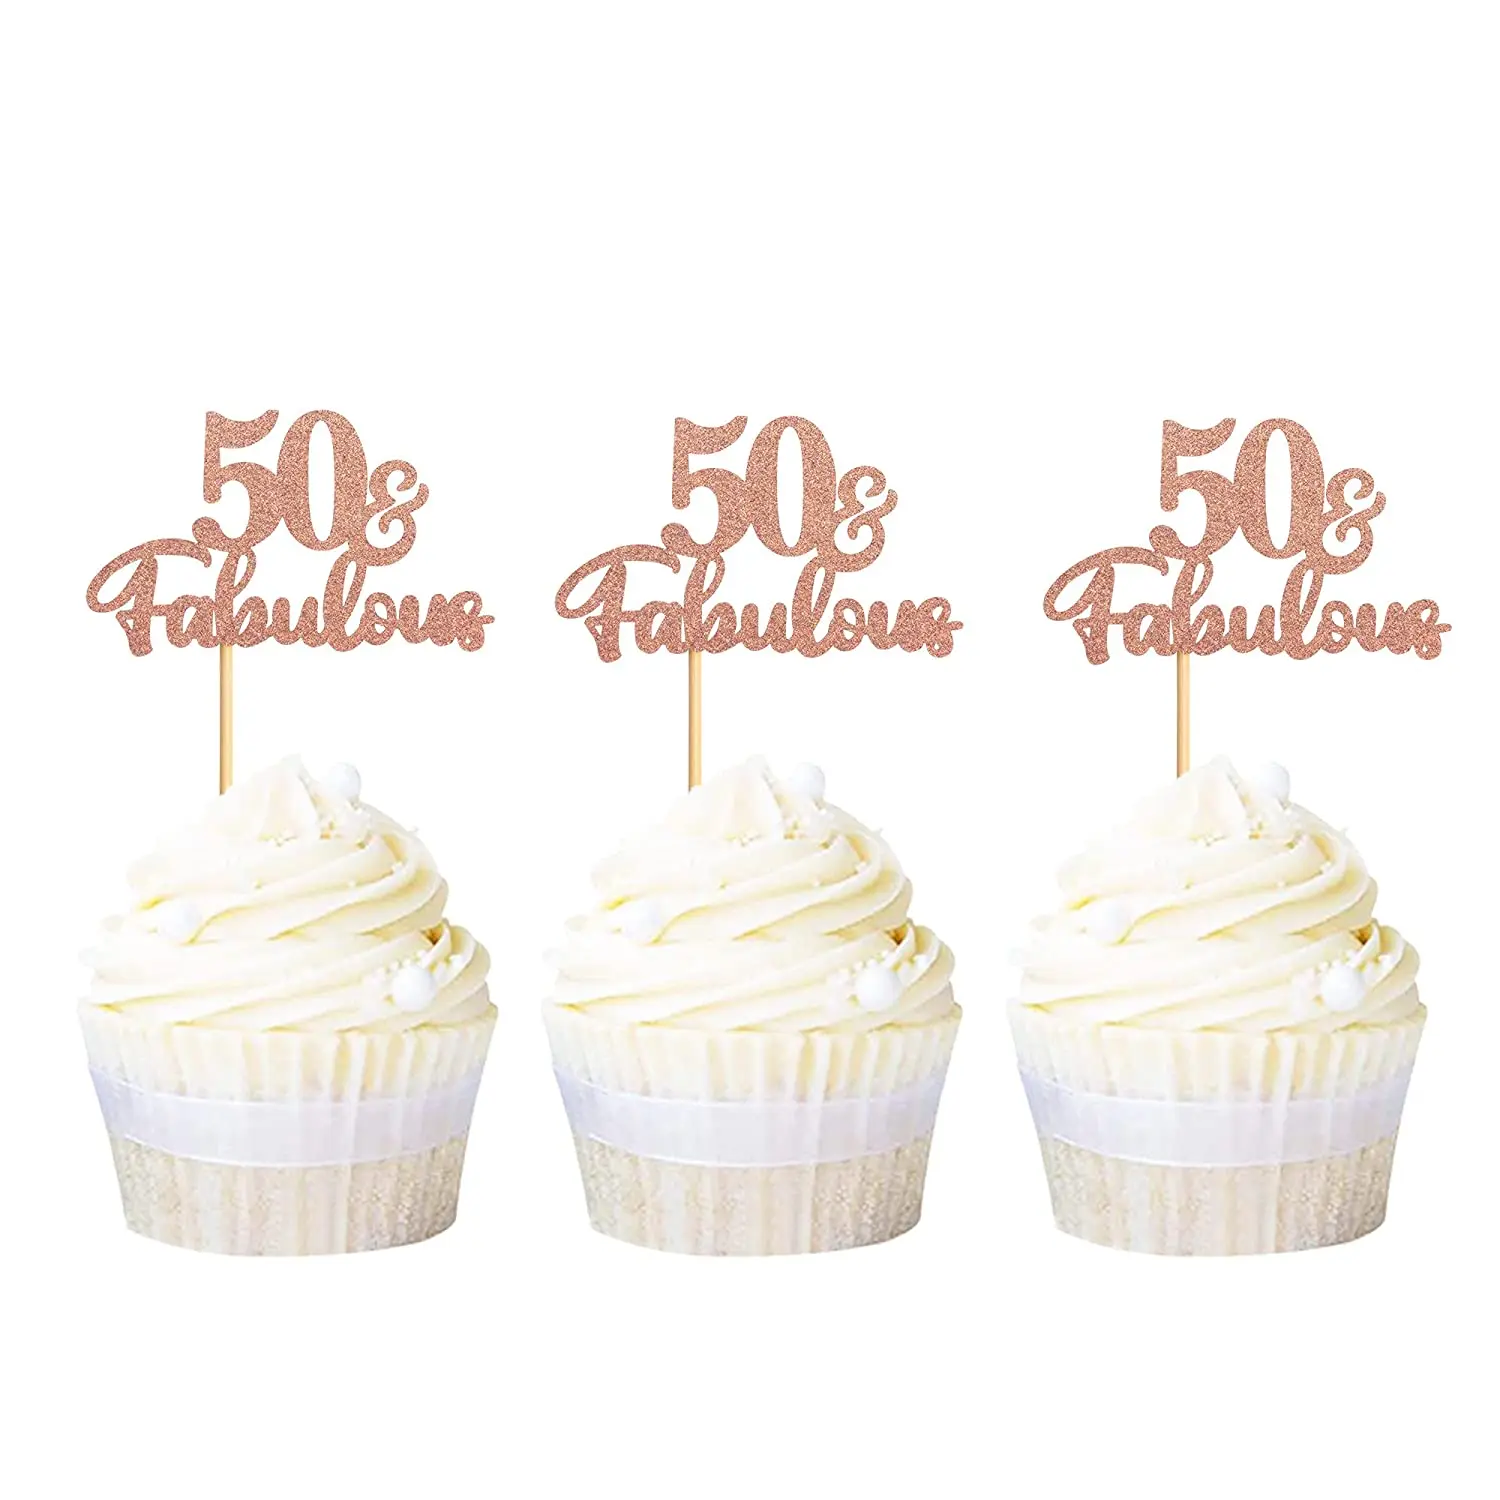 

24 Pack 50 Fabulous Cupcake Toppers Glitter 50th birthday cupcake picks Decorations for 50th Wedding Anniversary Birthday Party